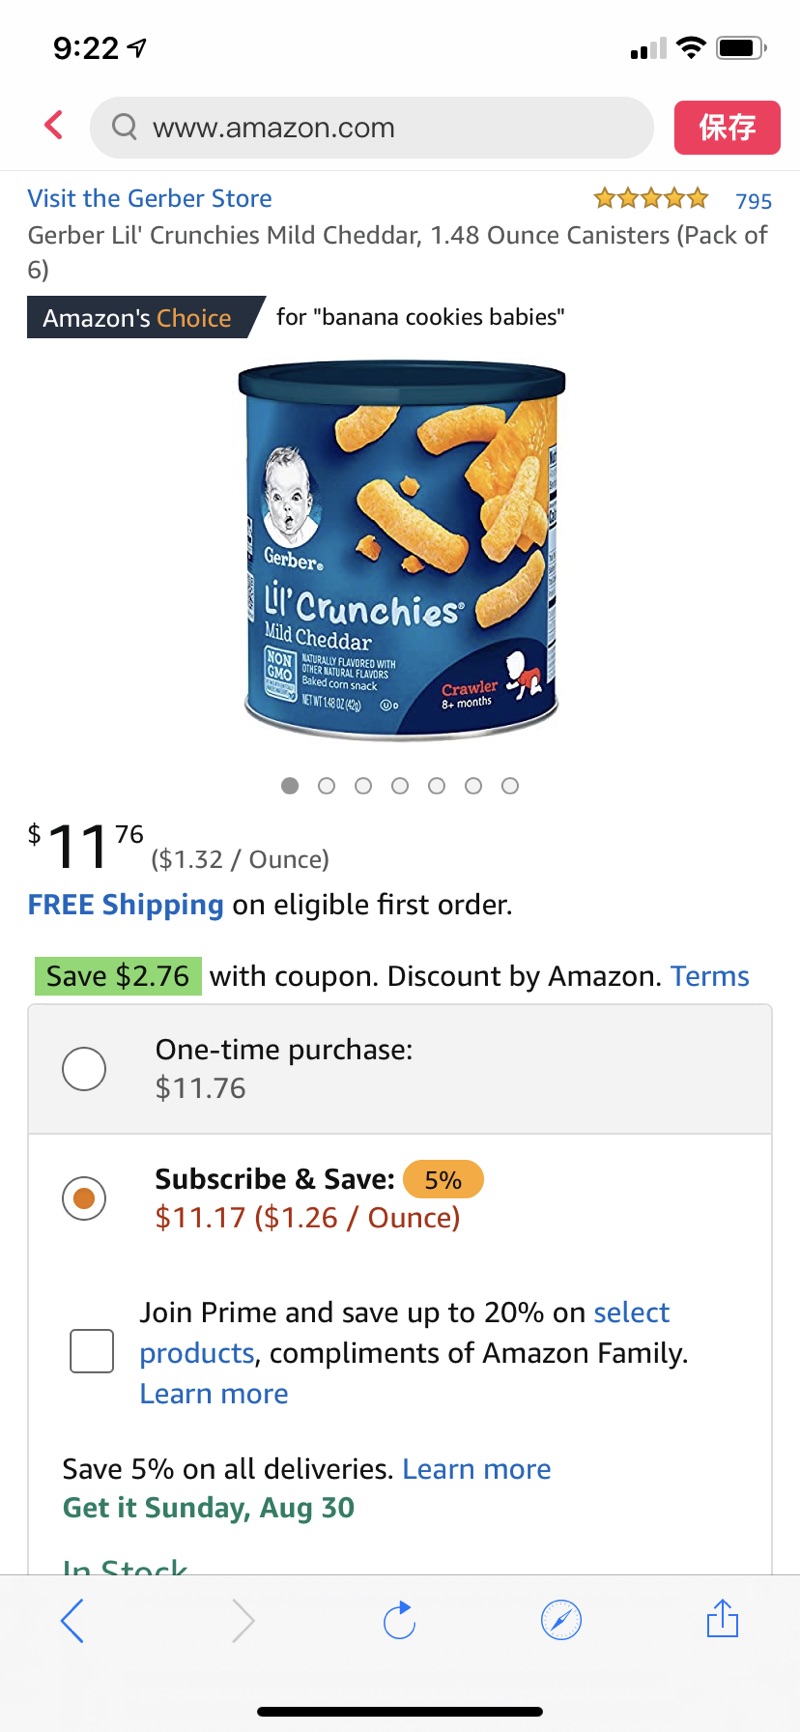 Gerber Lil' Crunchies Mild Cheddar, 1.48 Ounce Canisters (Pack of 6): Amazon.com: Grocery & Gourmet Food 嘉宝宝宝泡芙